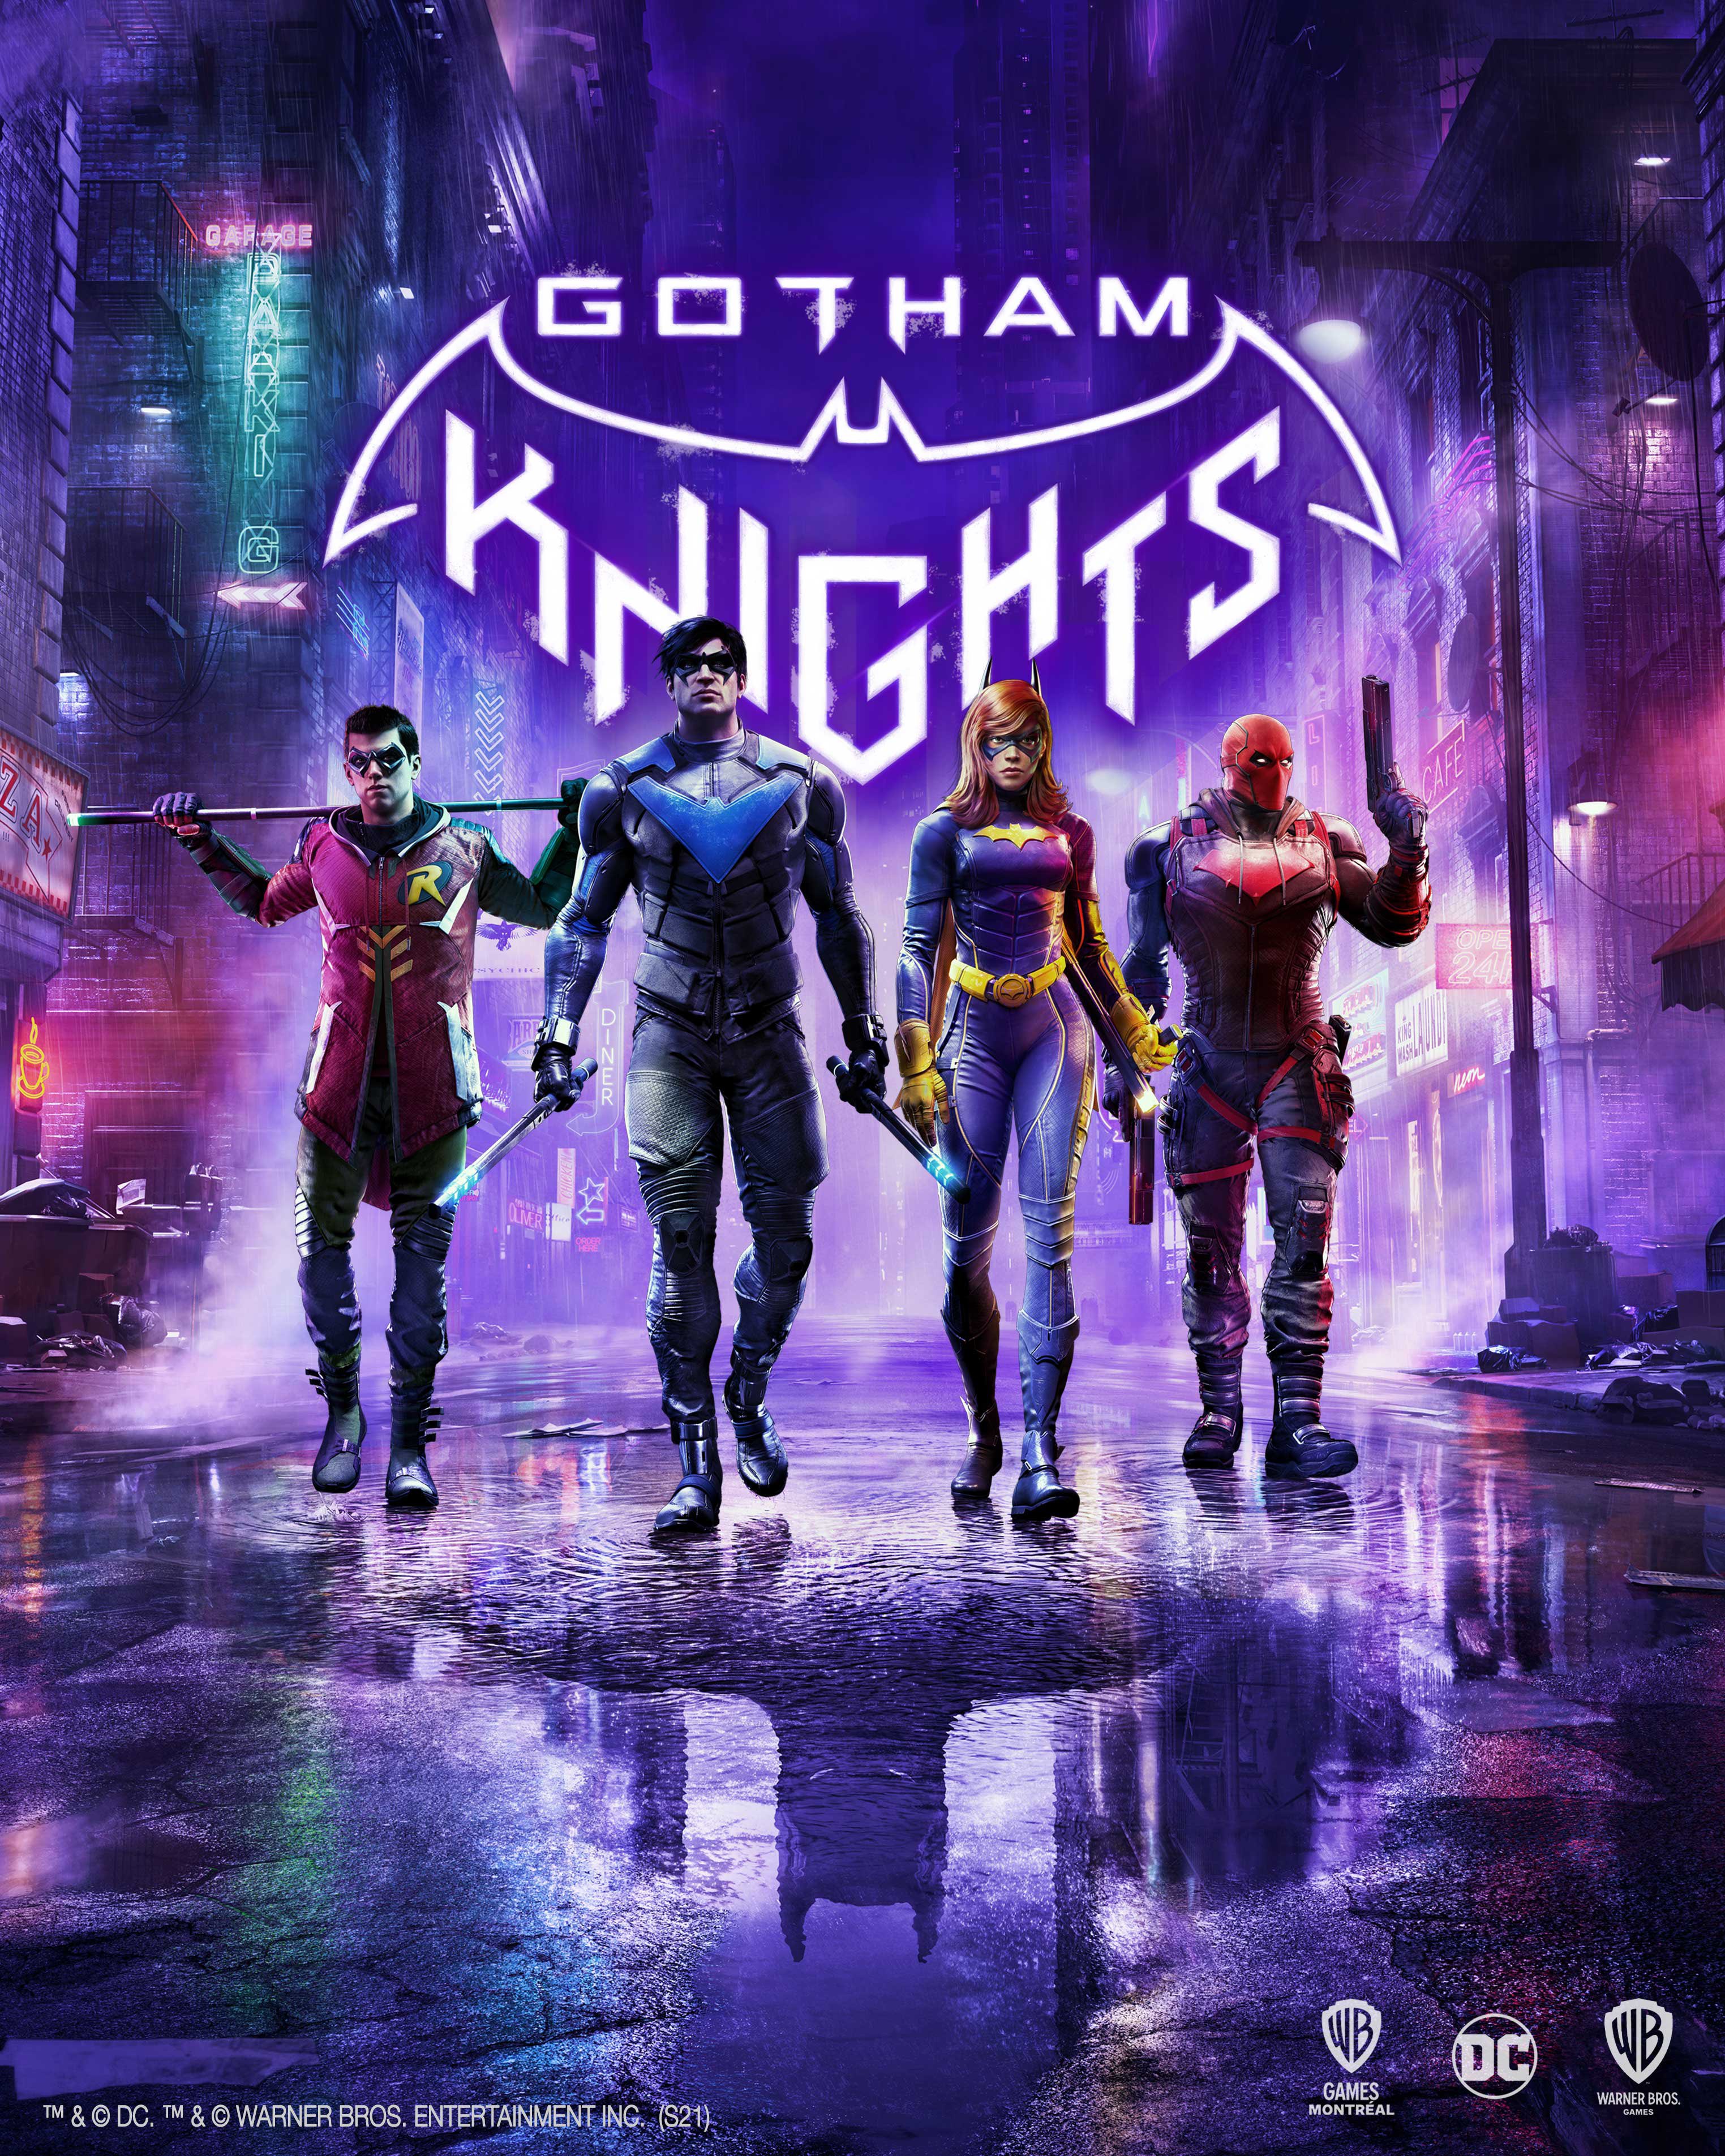 Is Gotham Knights TV Show Based On The Video Game?